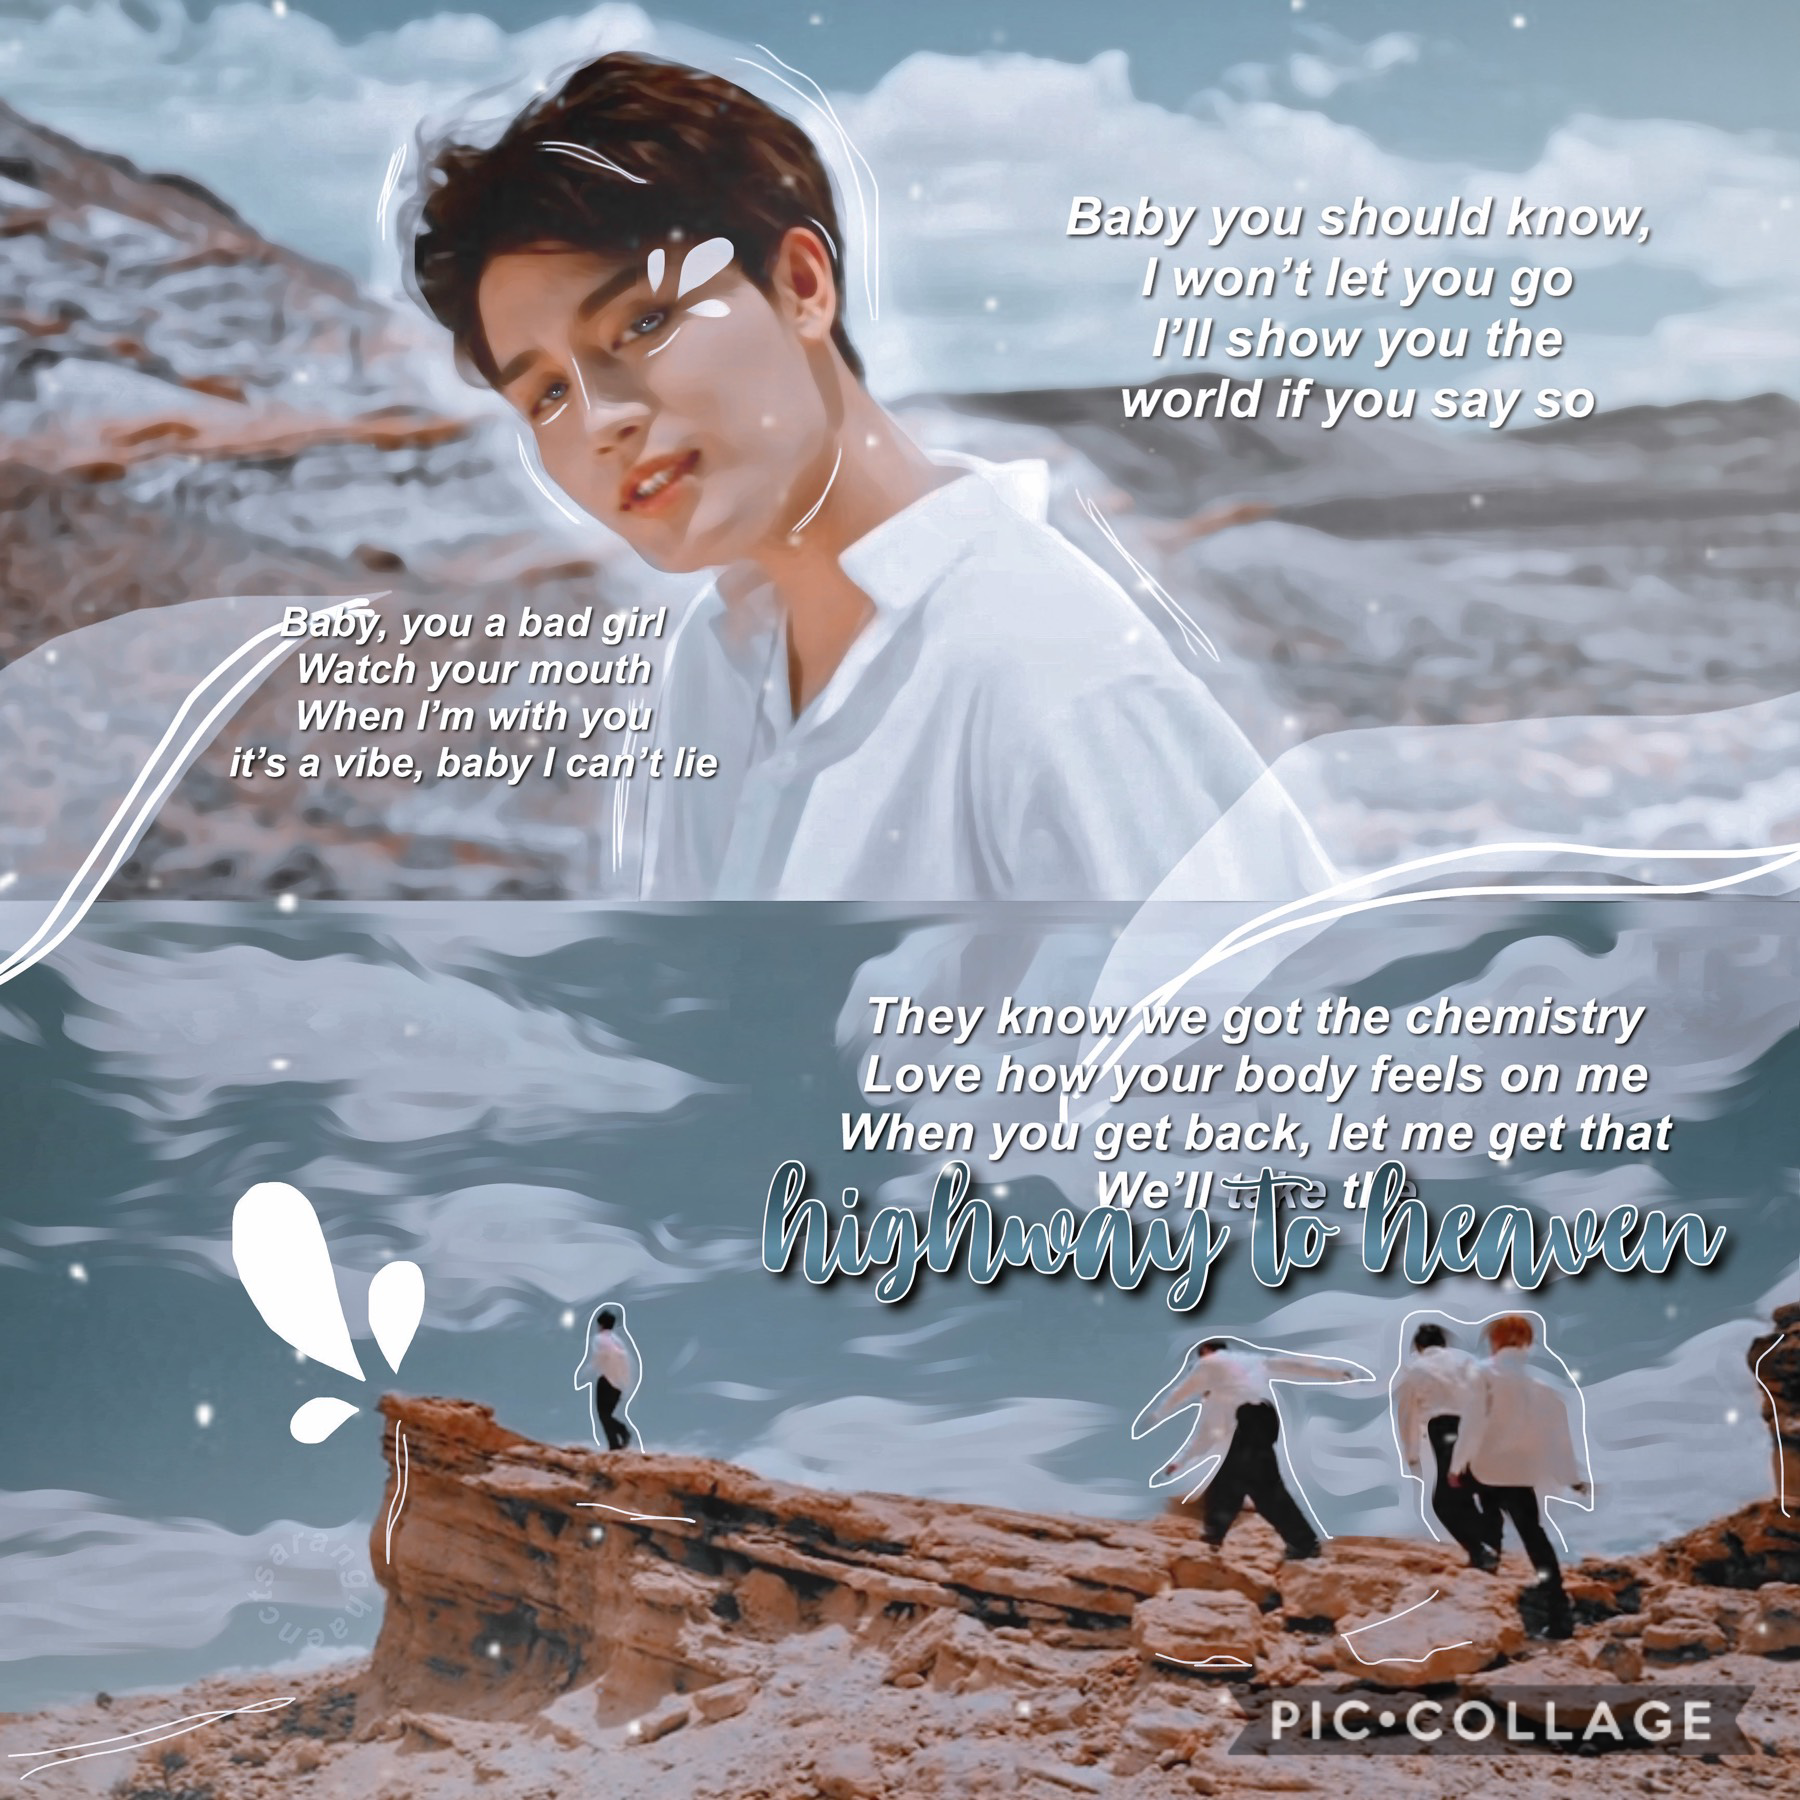 -tap-
welp is this good or bad? idk and idc because all I can see is moon taeil shine brighter than the stars. I love him so much and I can’t express how much I do in a tiny winy paragraph. thanks for listening to my ted talk. 